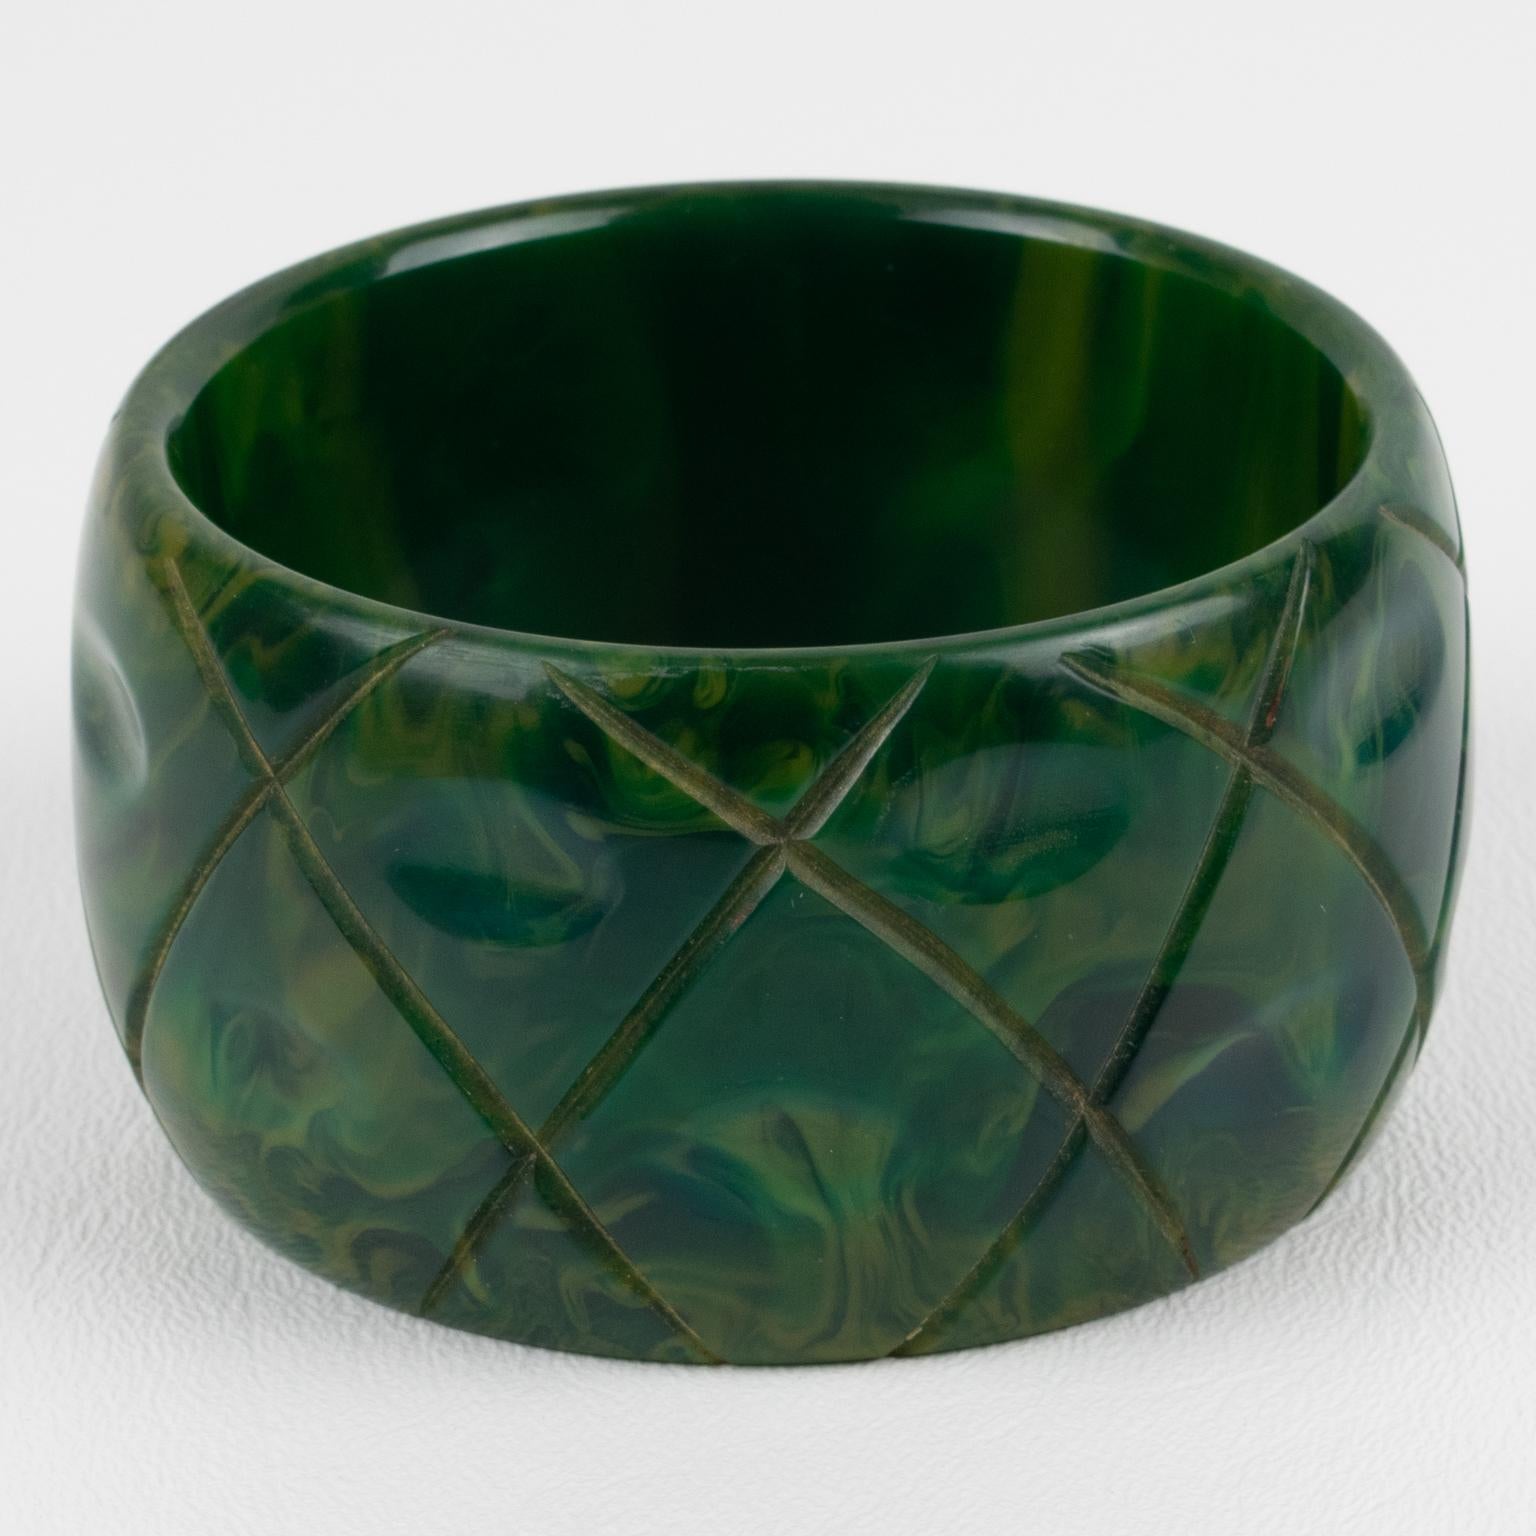 This is a gorgeous green blue-moon marble Bakelite carved bracelet bangle. It features a chunky oversized domed shape with a geometric carving design all around. The color is an intense green-blue tone with milky and light yellow cloudy swirling.